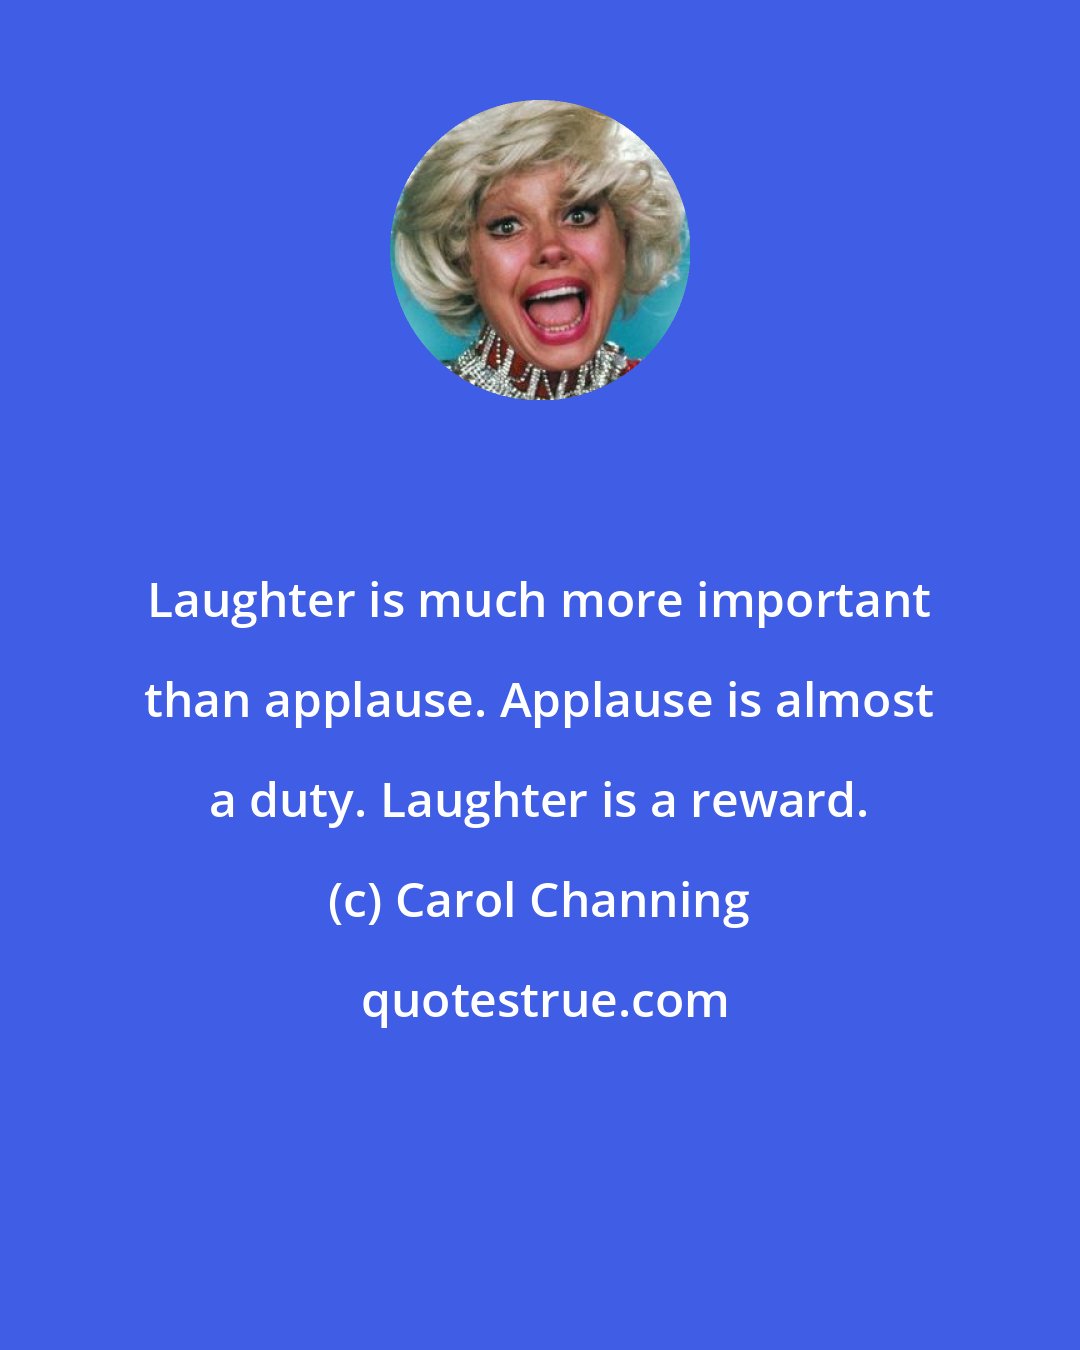 Carol Channing: Laughter is much more important than applause. Applause is almost a duty. Laughter is a reward.